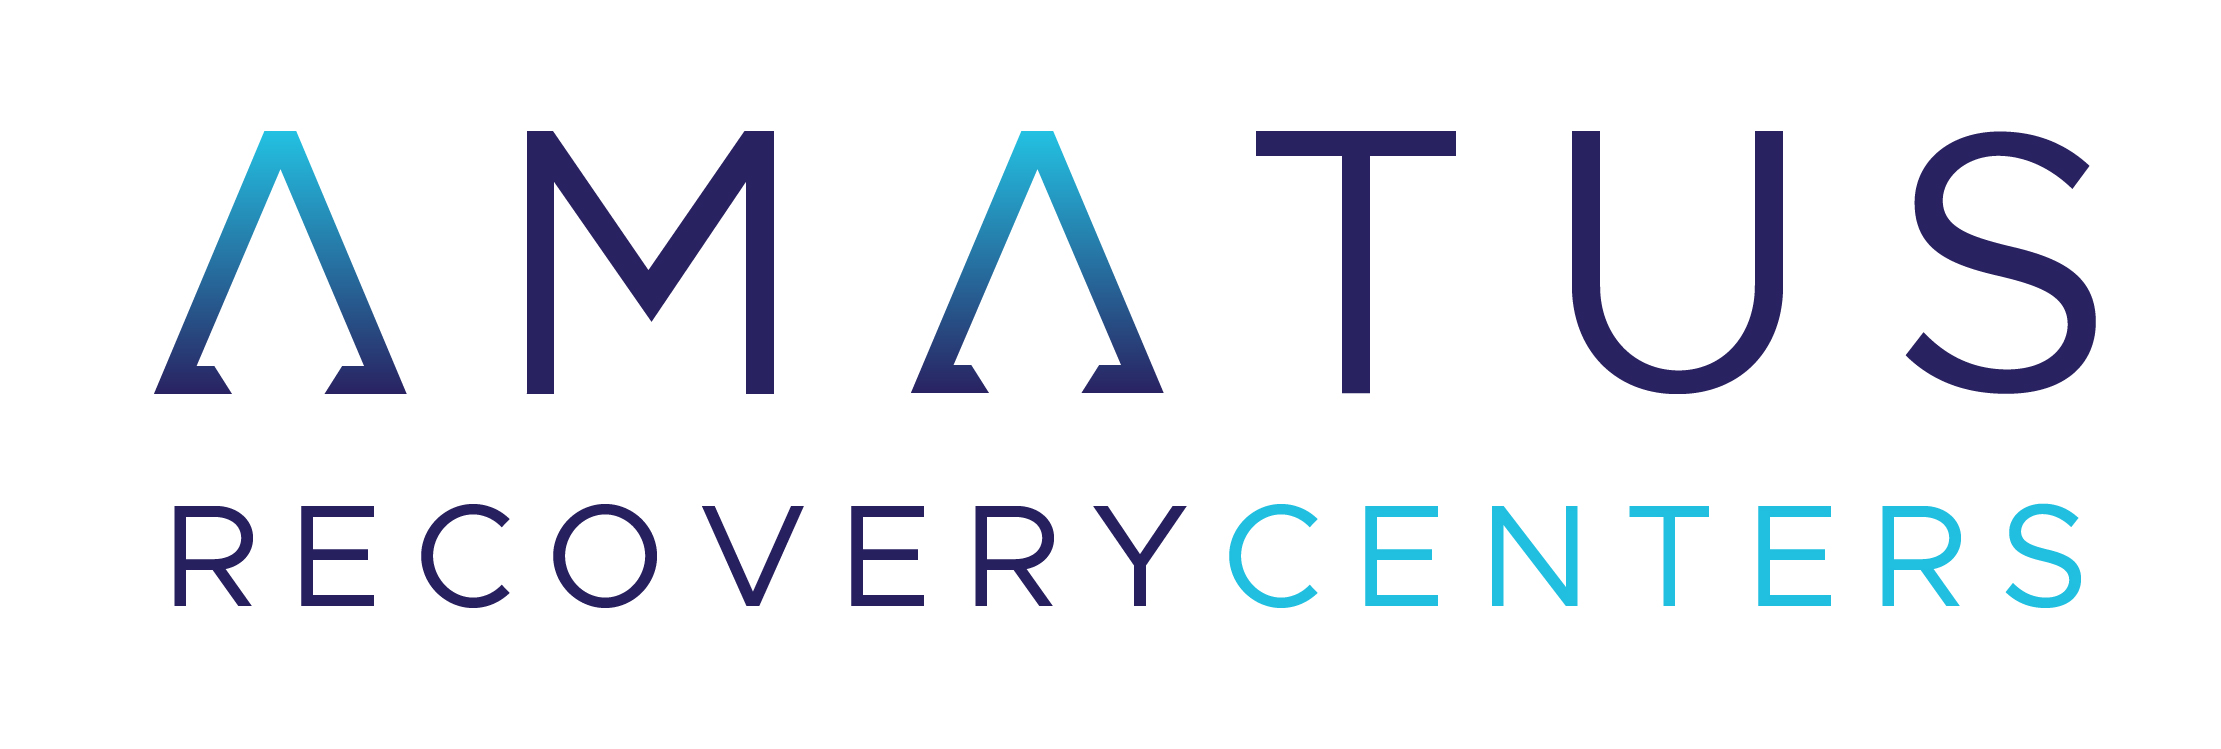 amatus recovery logo 2221 by 749